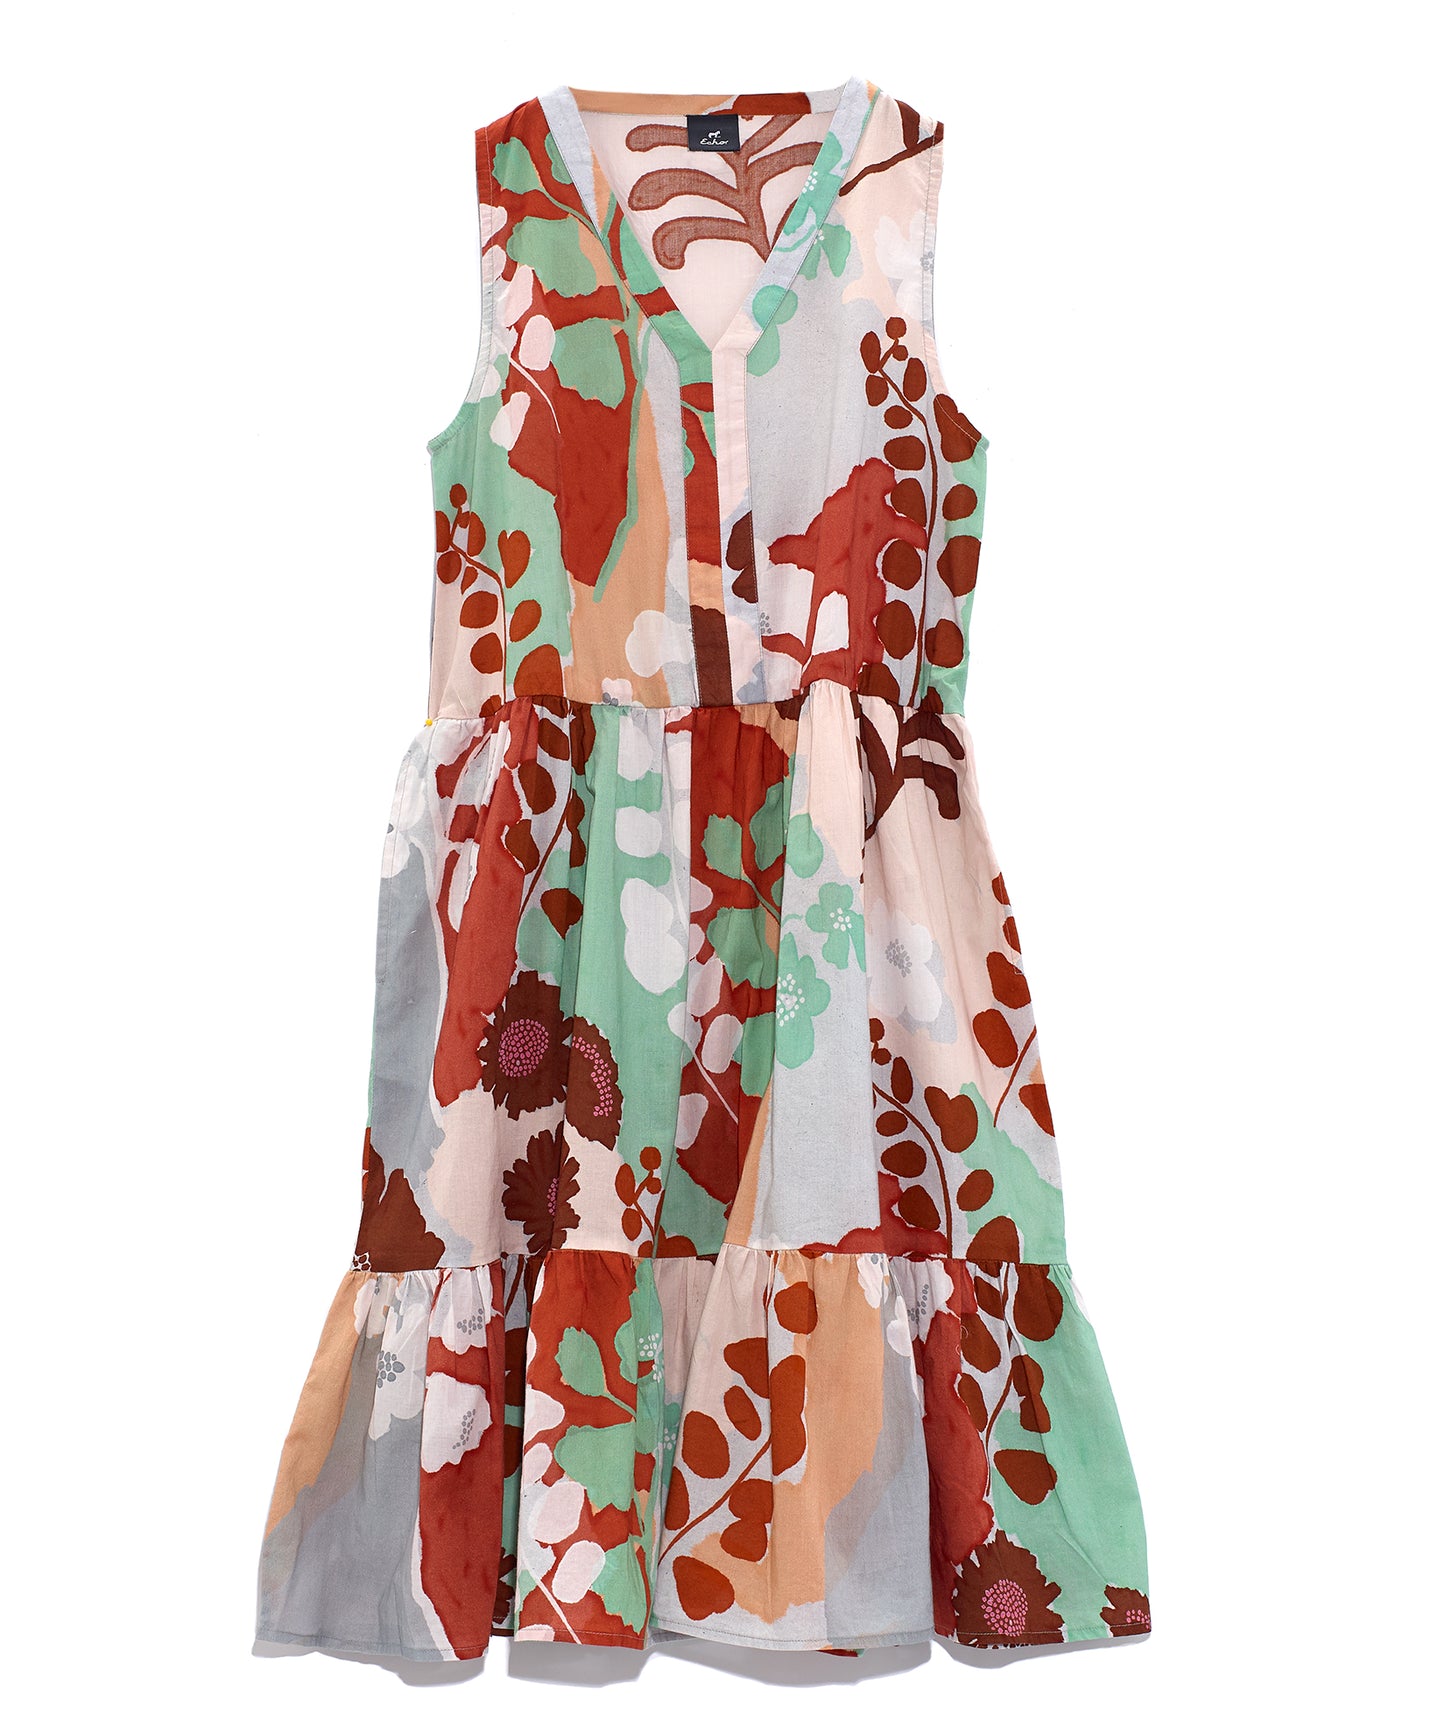 Wild Floral Tiered Sun Dress in color Sienna